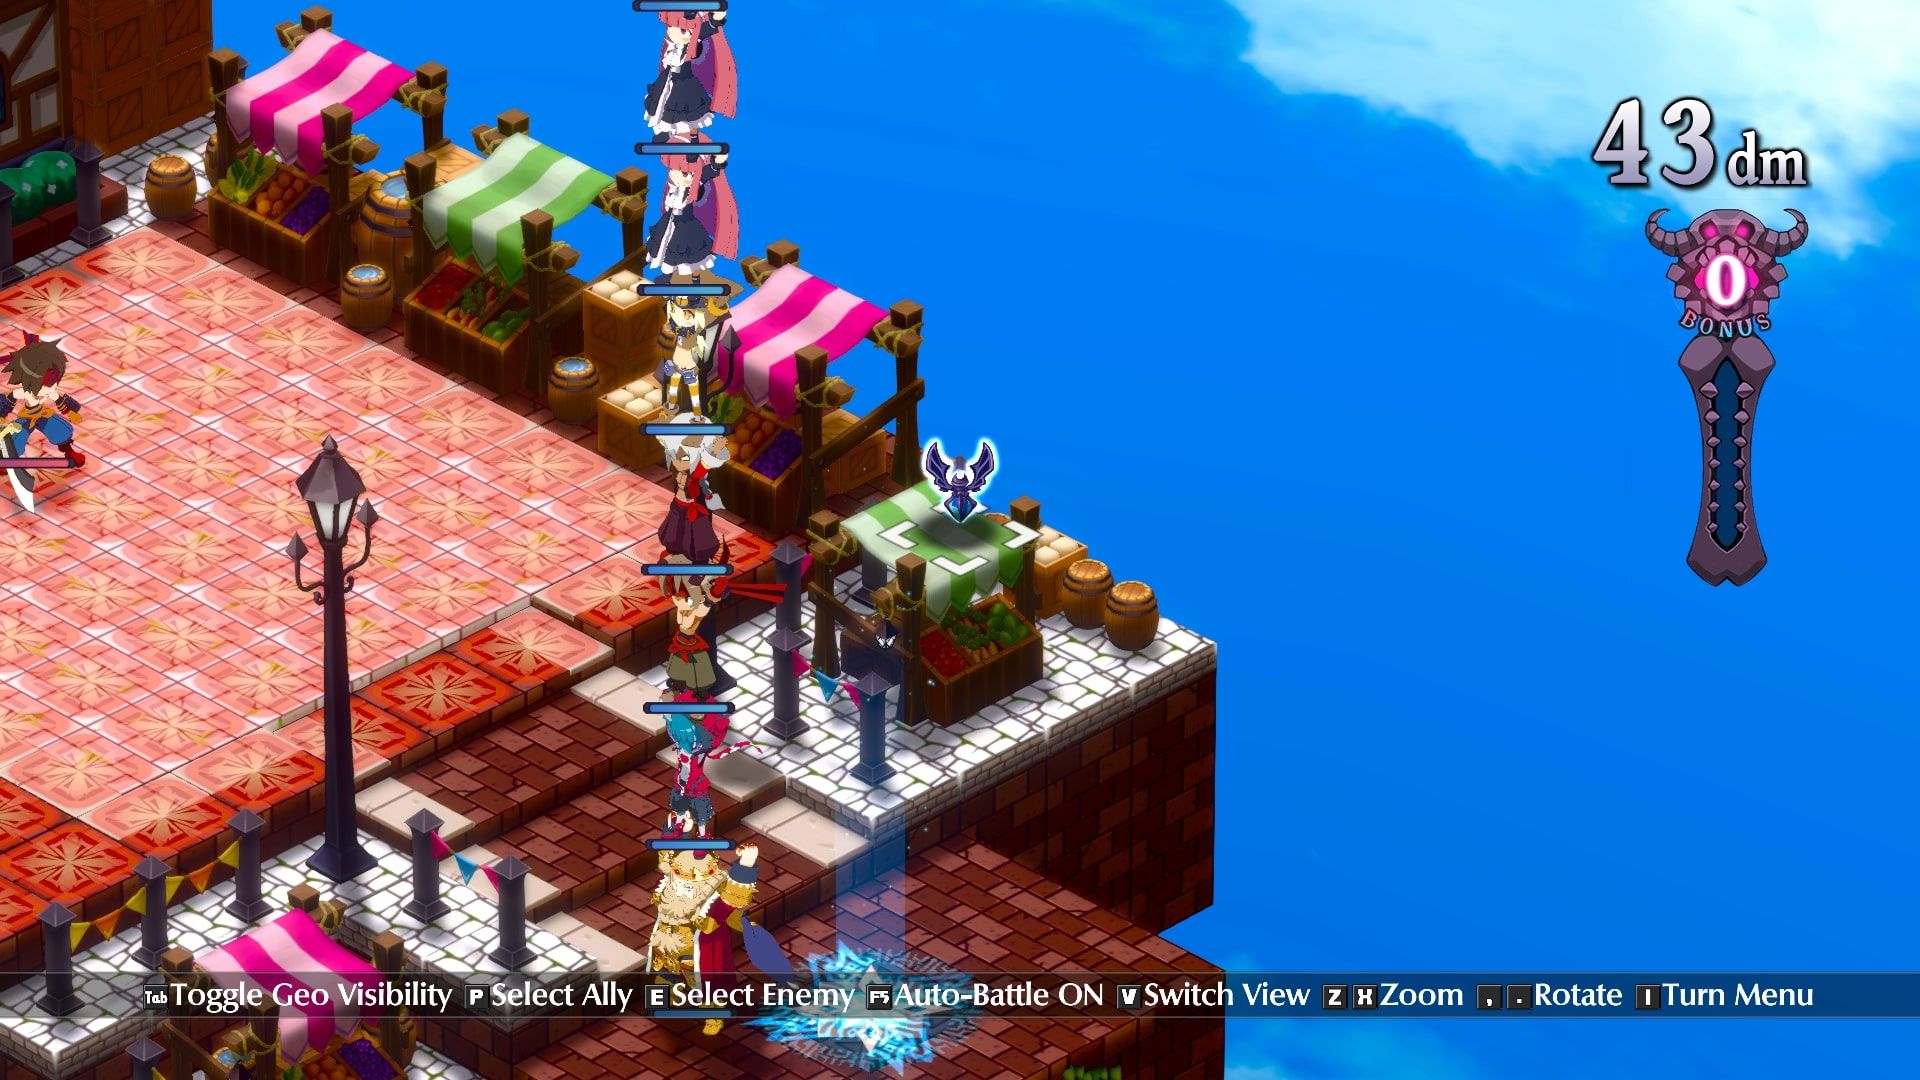 Disgaea 6 making a tower of characters